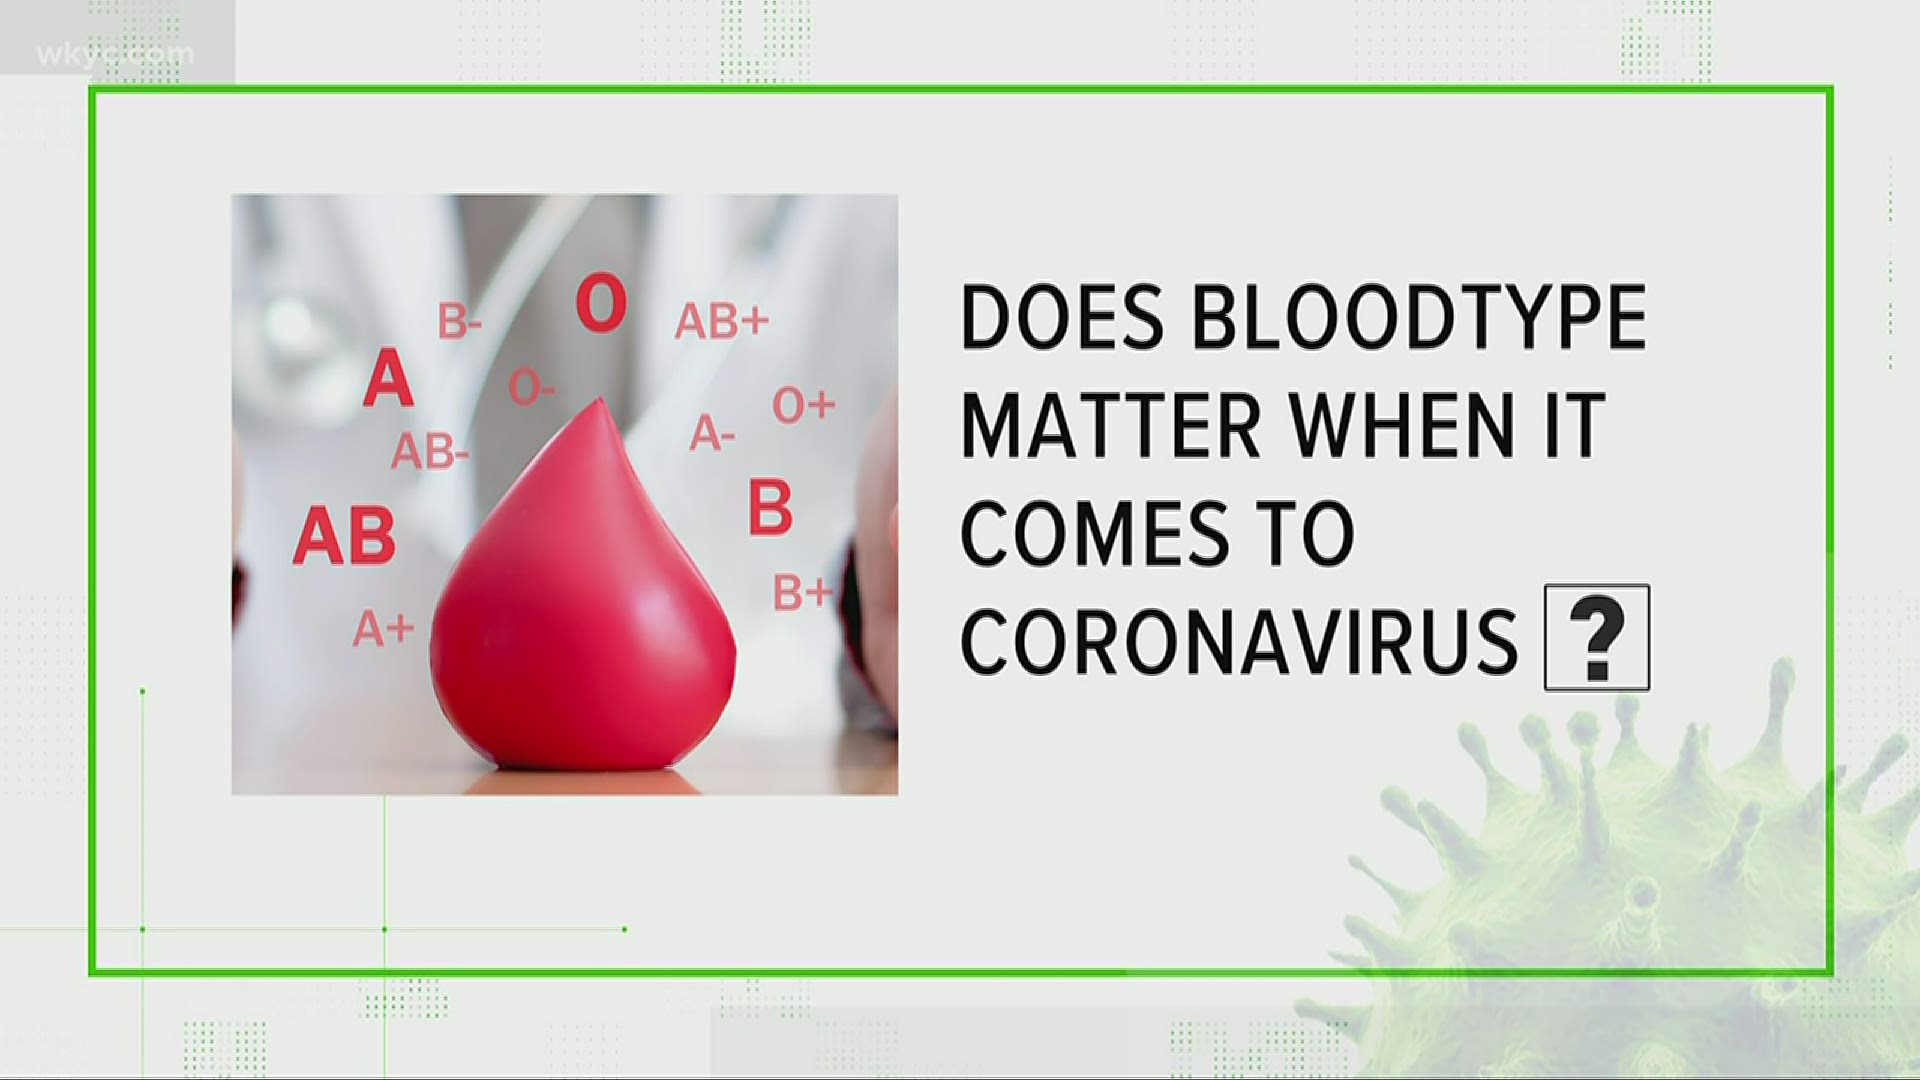 We know there are concerns that some have about blood types and the coronavirus. Their question: Does my blood type make me more or less succeptable to the virus?